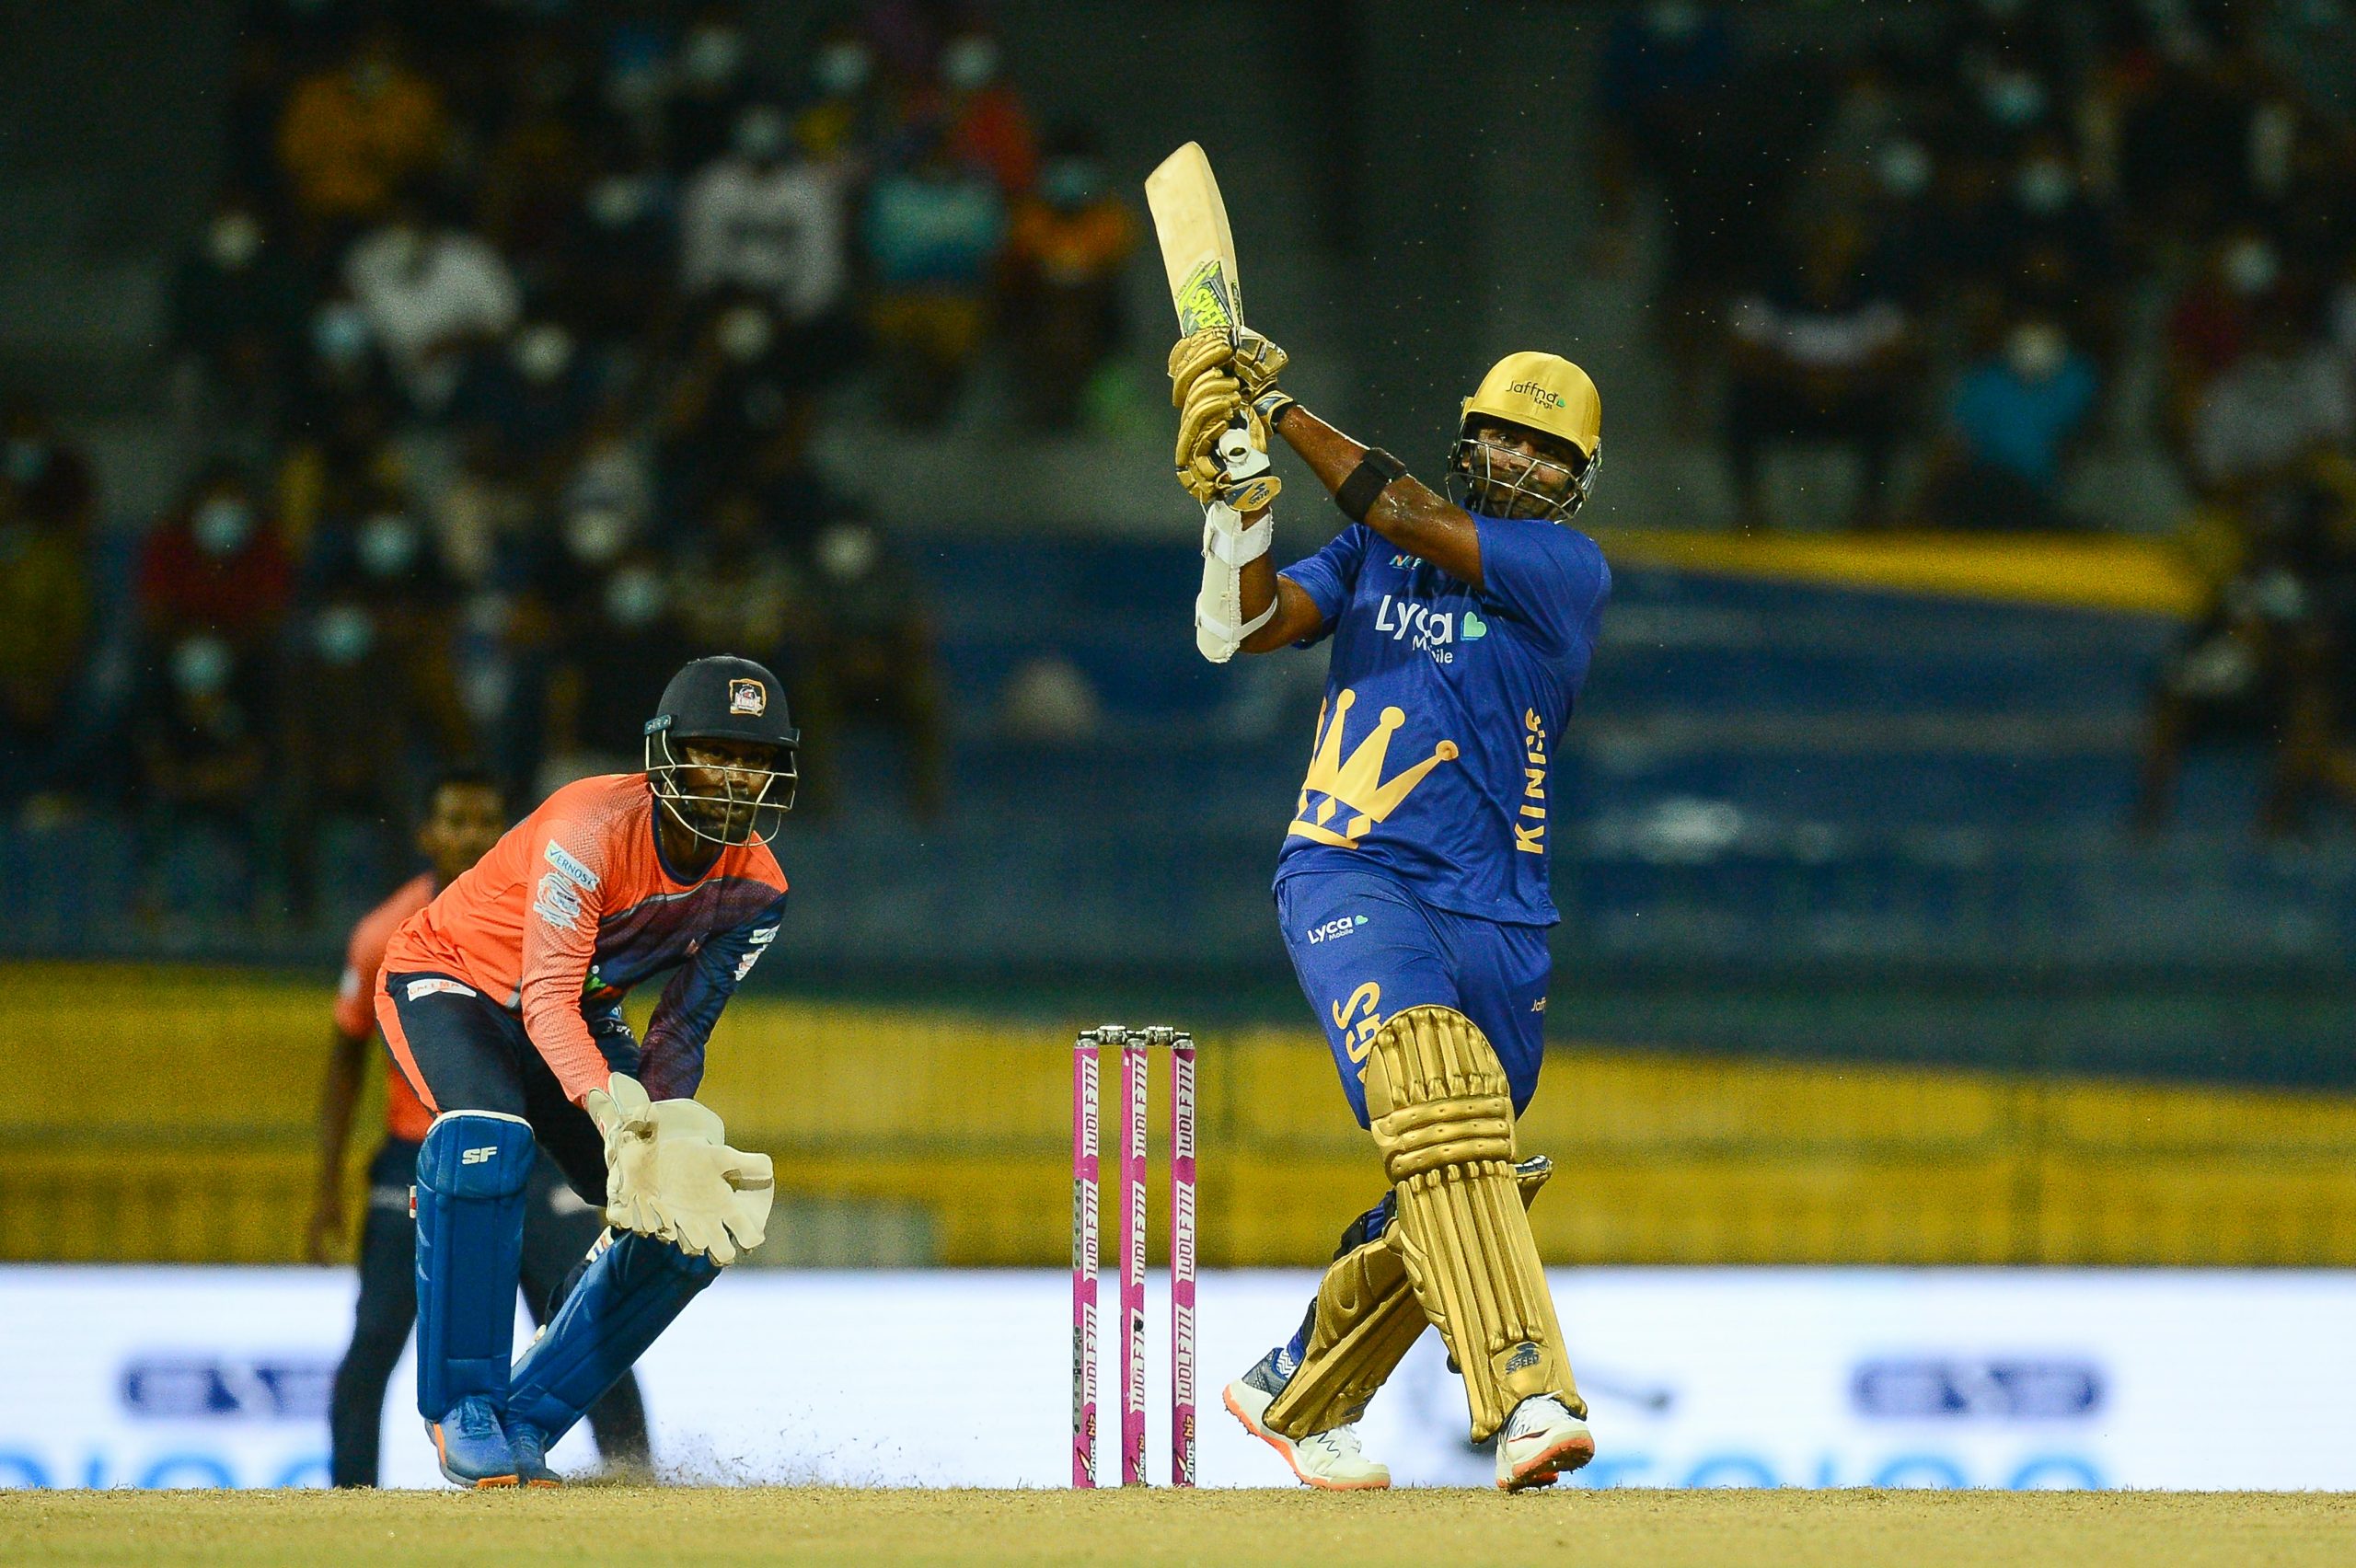 Jaffna Kings prevail over Kandy Warriors in run-riot